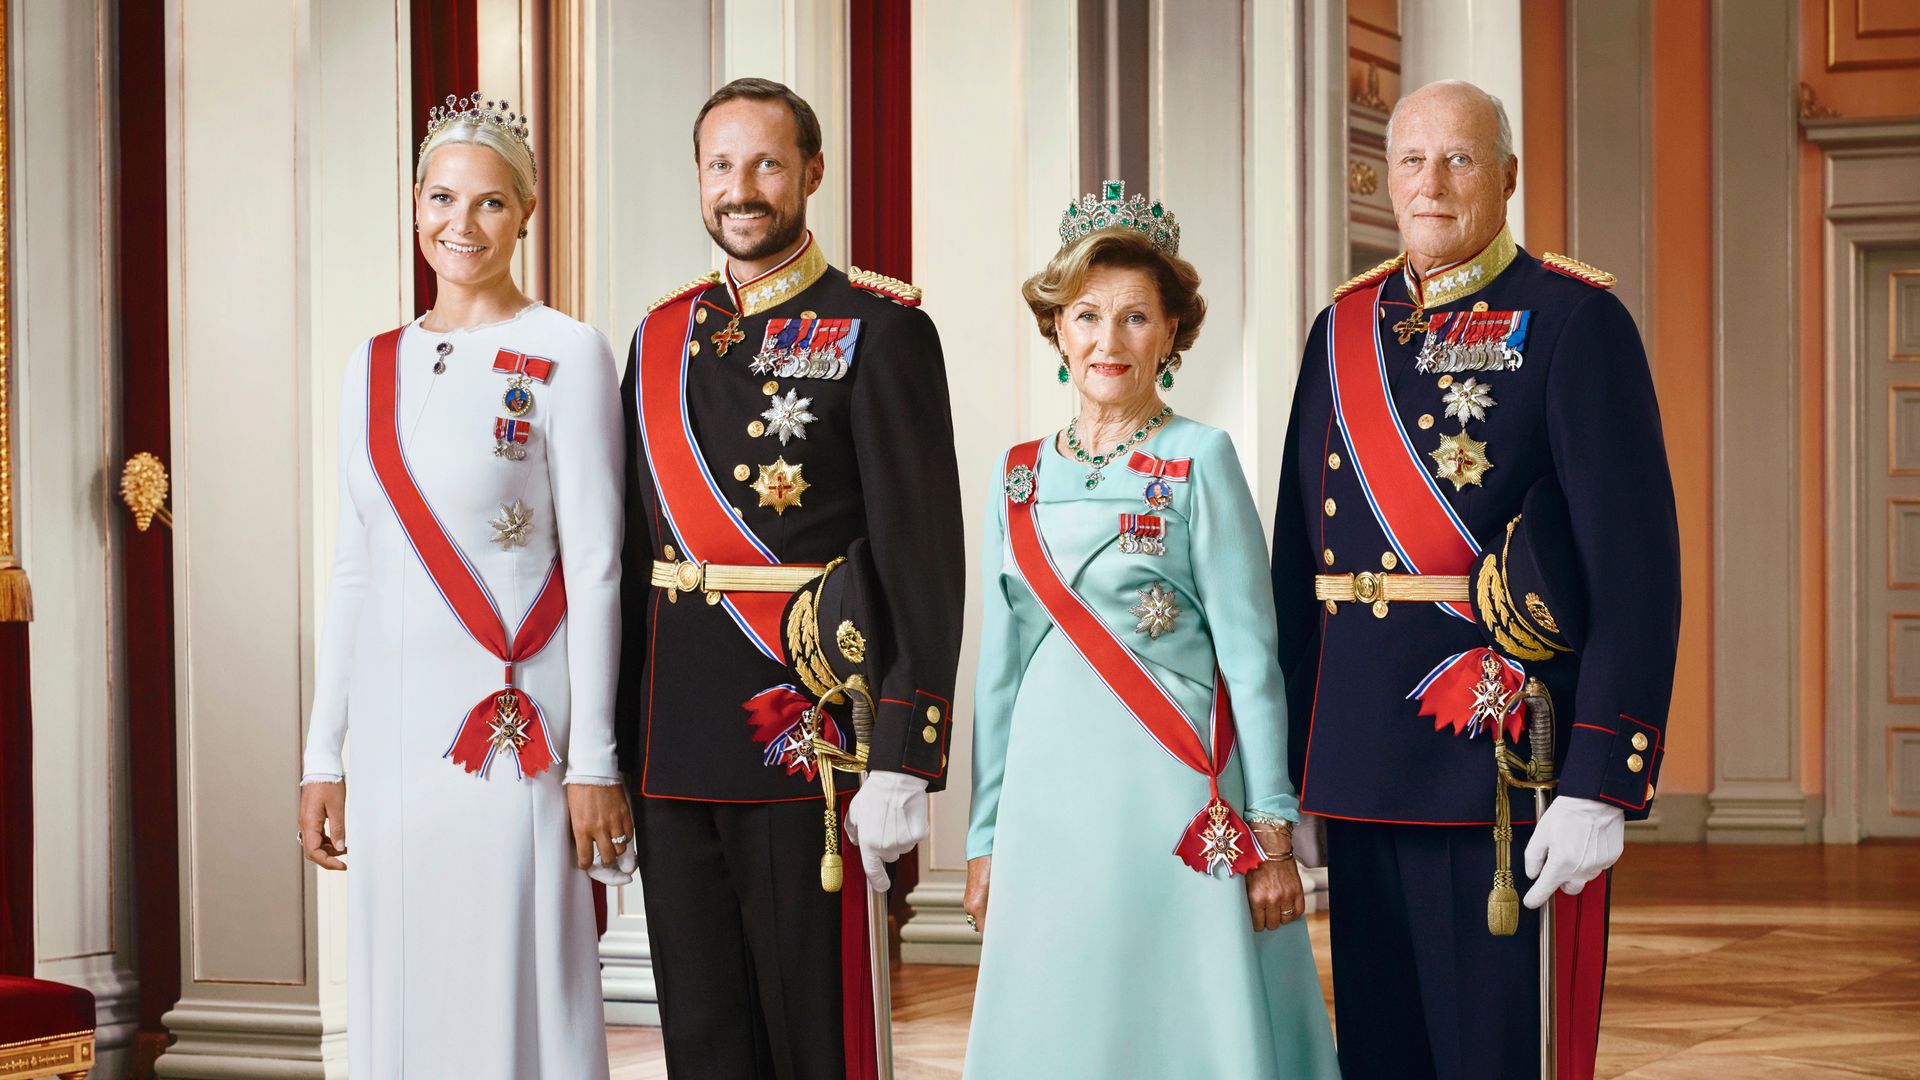 King Harald extends sick leave after hospitalisation as Haakon and Mette-Marit step in